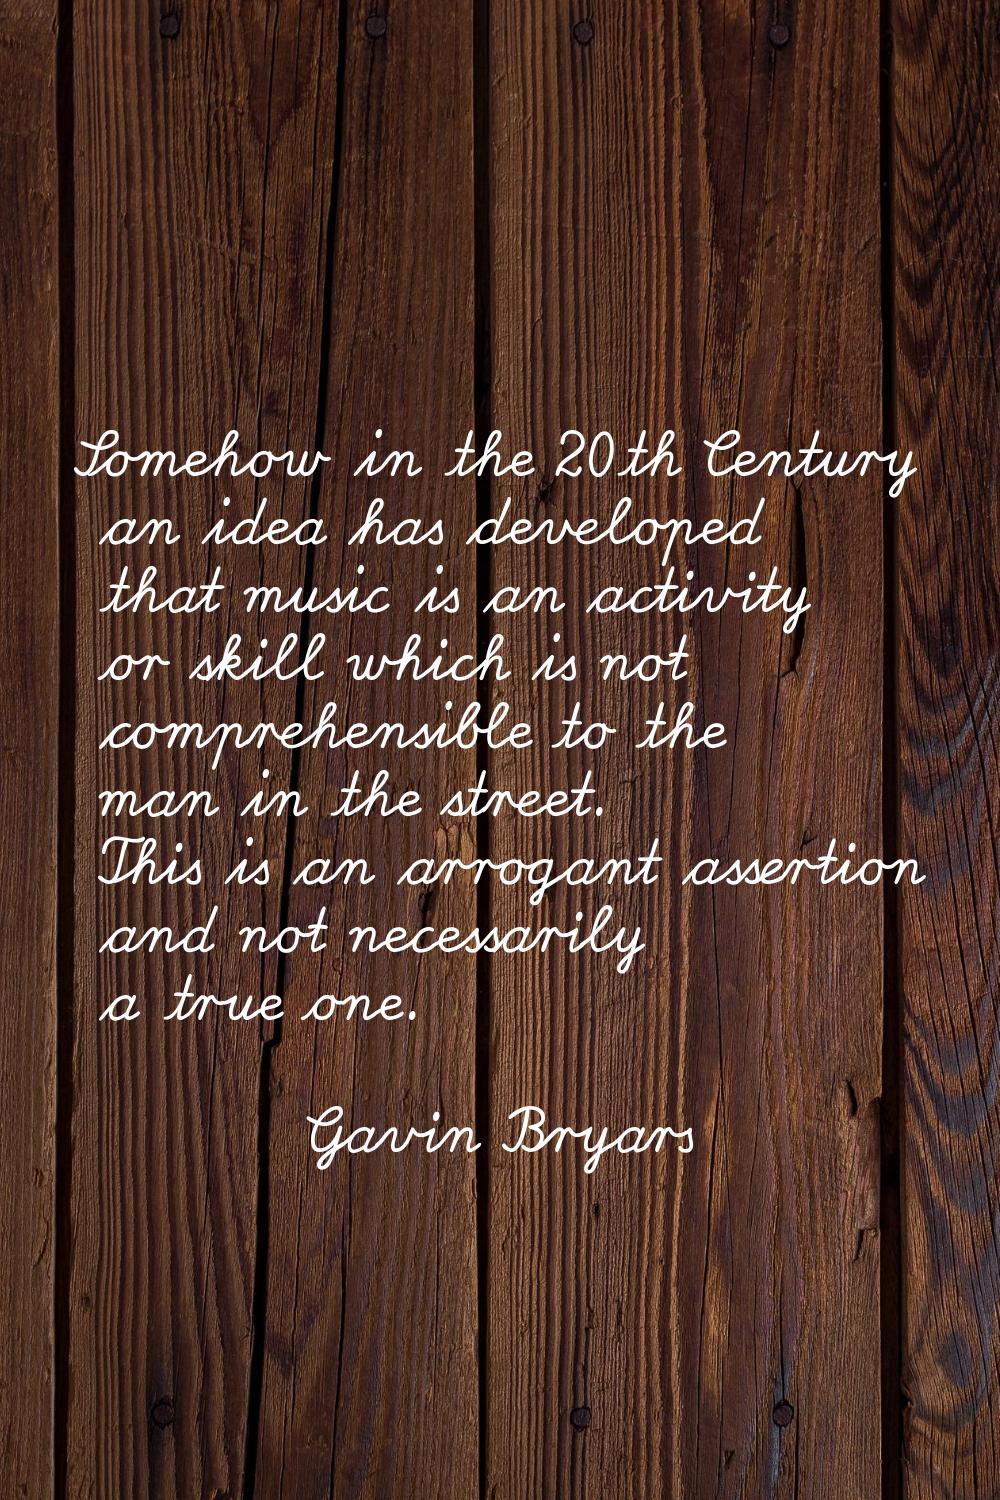 Somehow in the 20th Century an idea has developed that music is an activity or skill which is not c